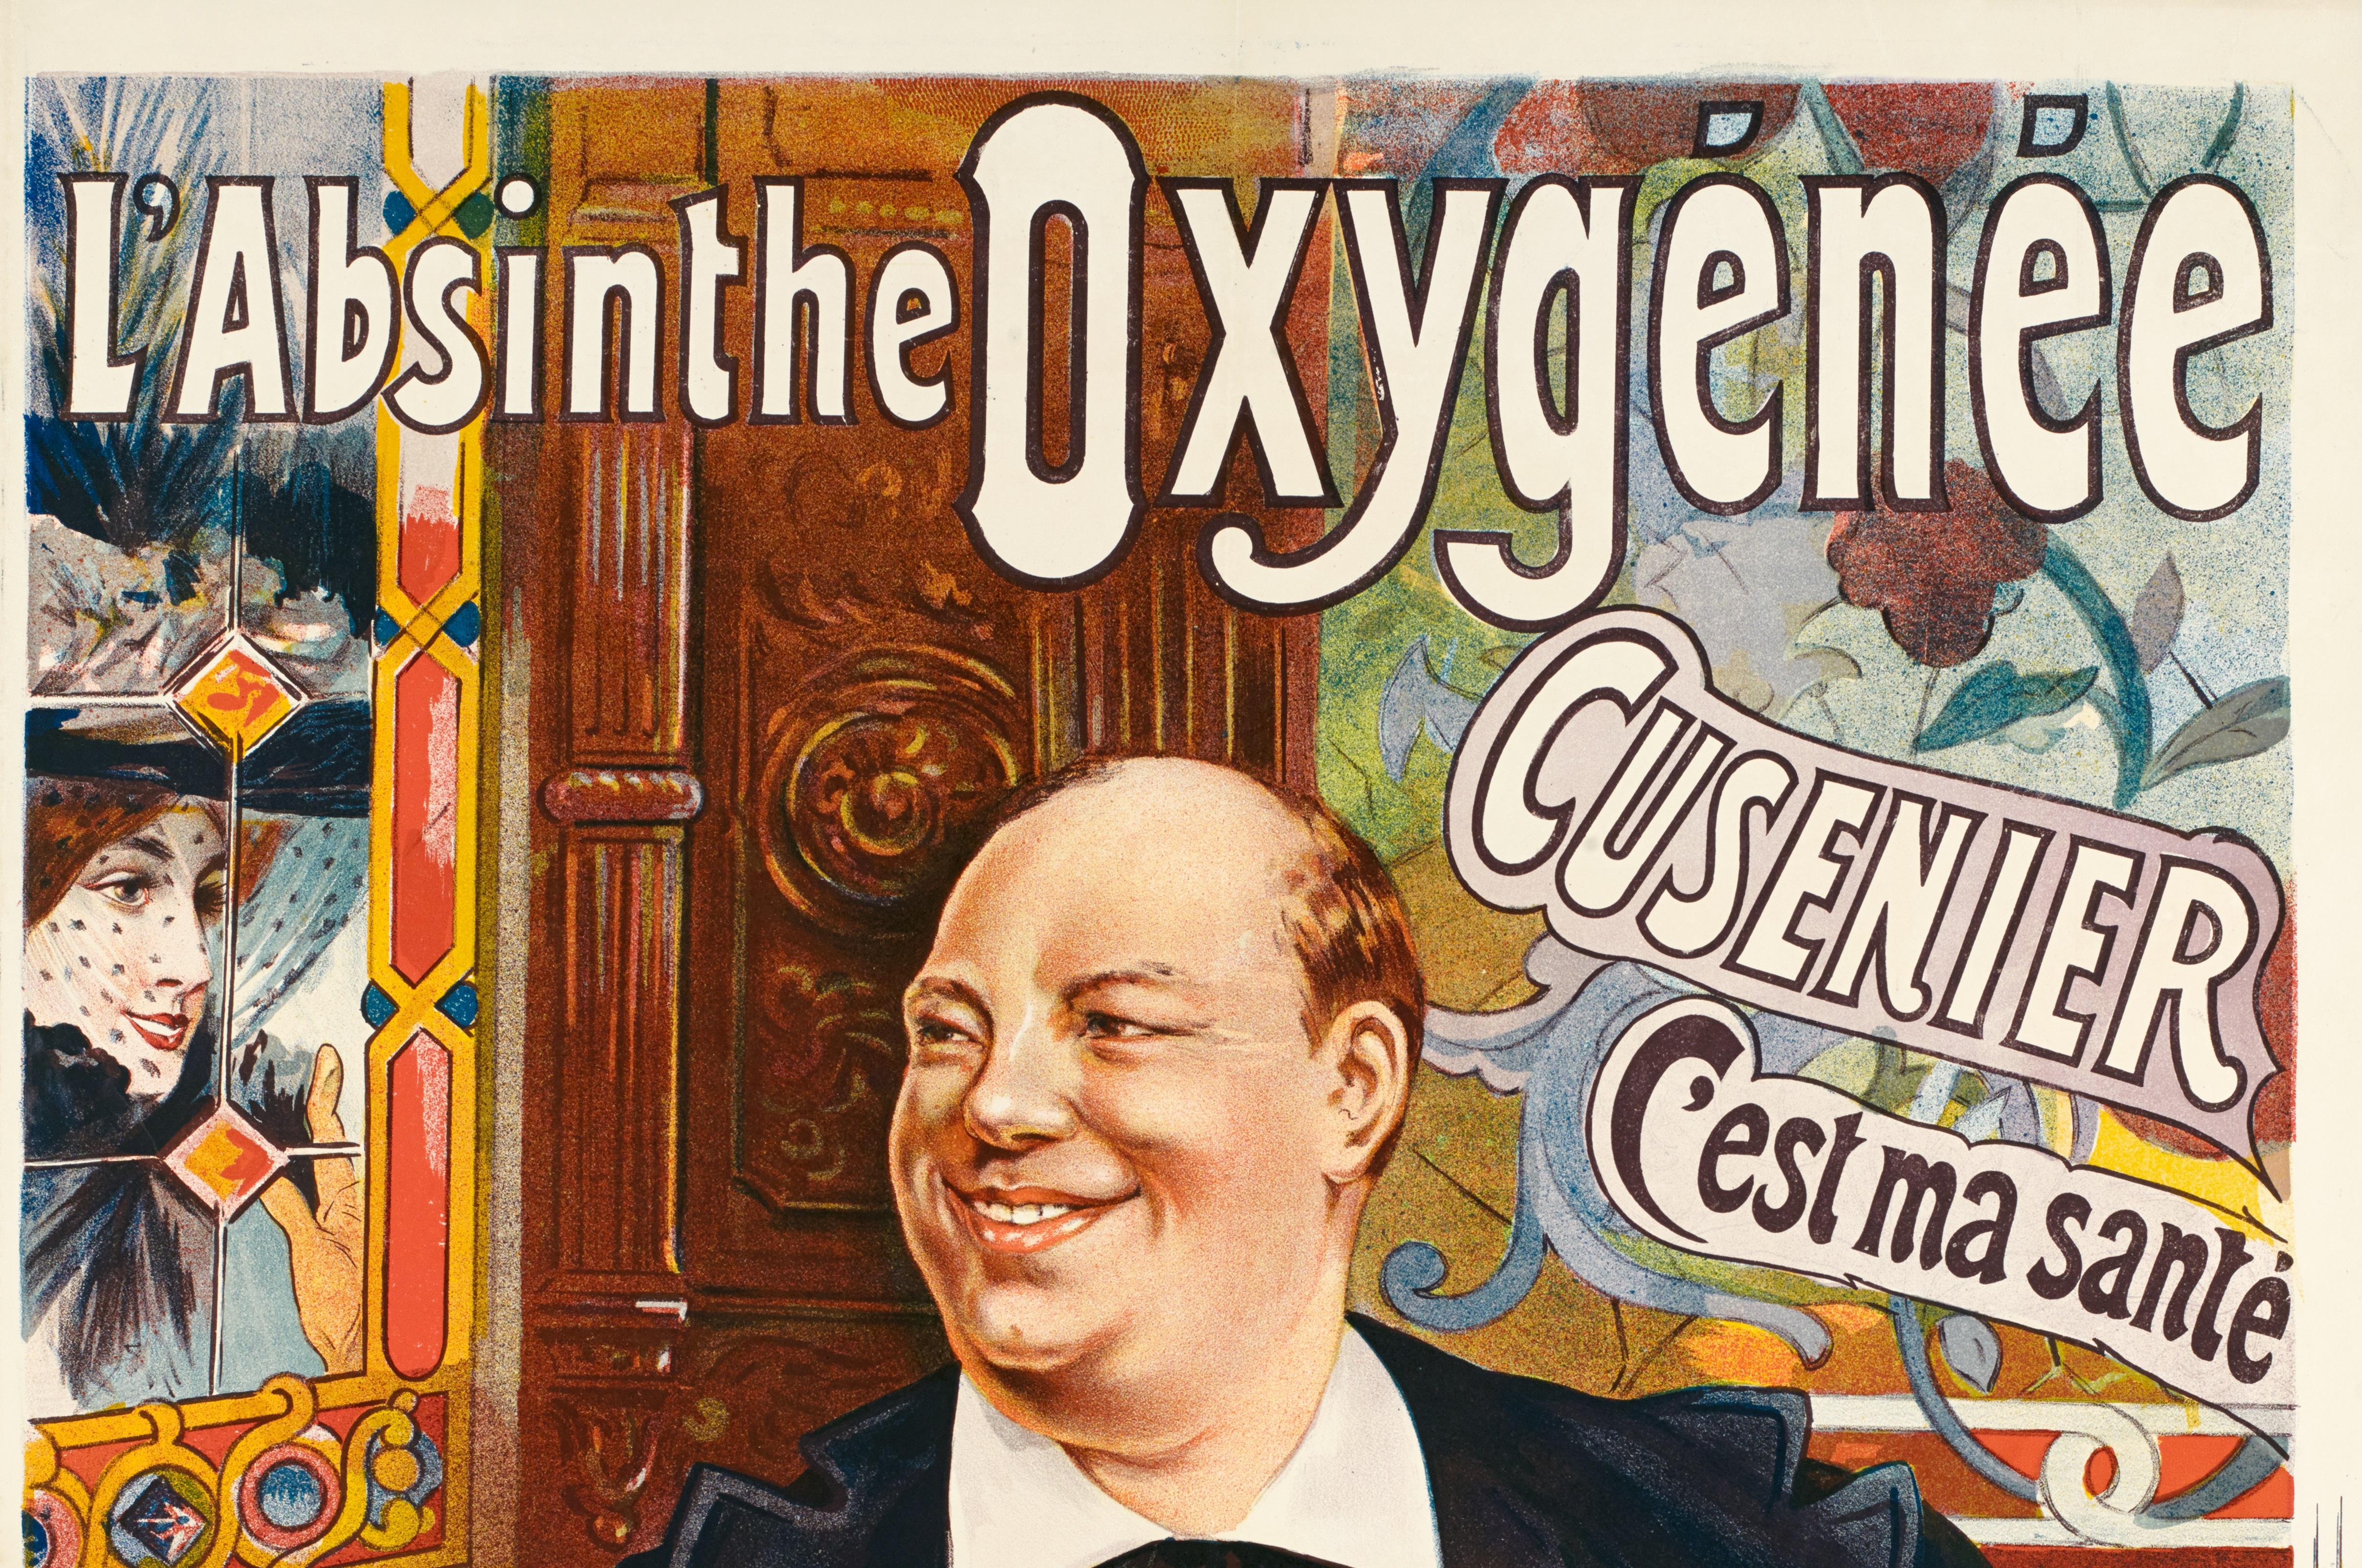 Original Vintage Poster created by Fransisco Tamagno for Absinthe Cusenier advertising in 1896.

Artist: Fransisco Tamagno (1851-1933)
Title: L’Absinthe Cusenier Oxygenée - C’est ma santé
Date: 1896
Size: 25.8 x 34.3 in / 65.5 x 87 cm
Printer